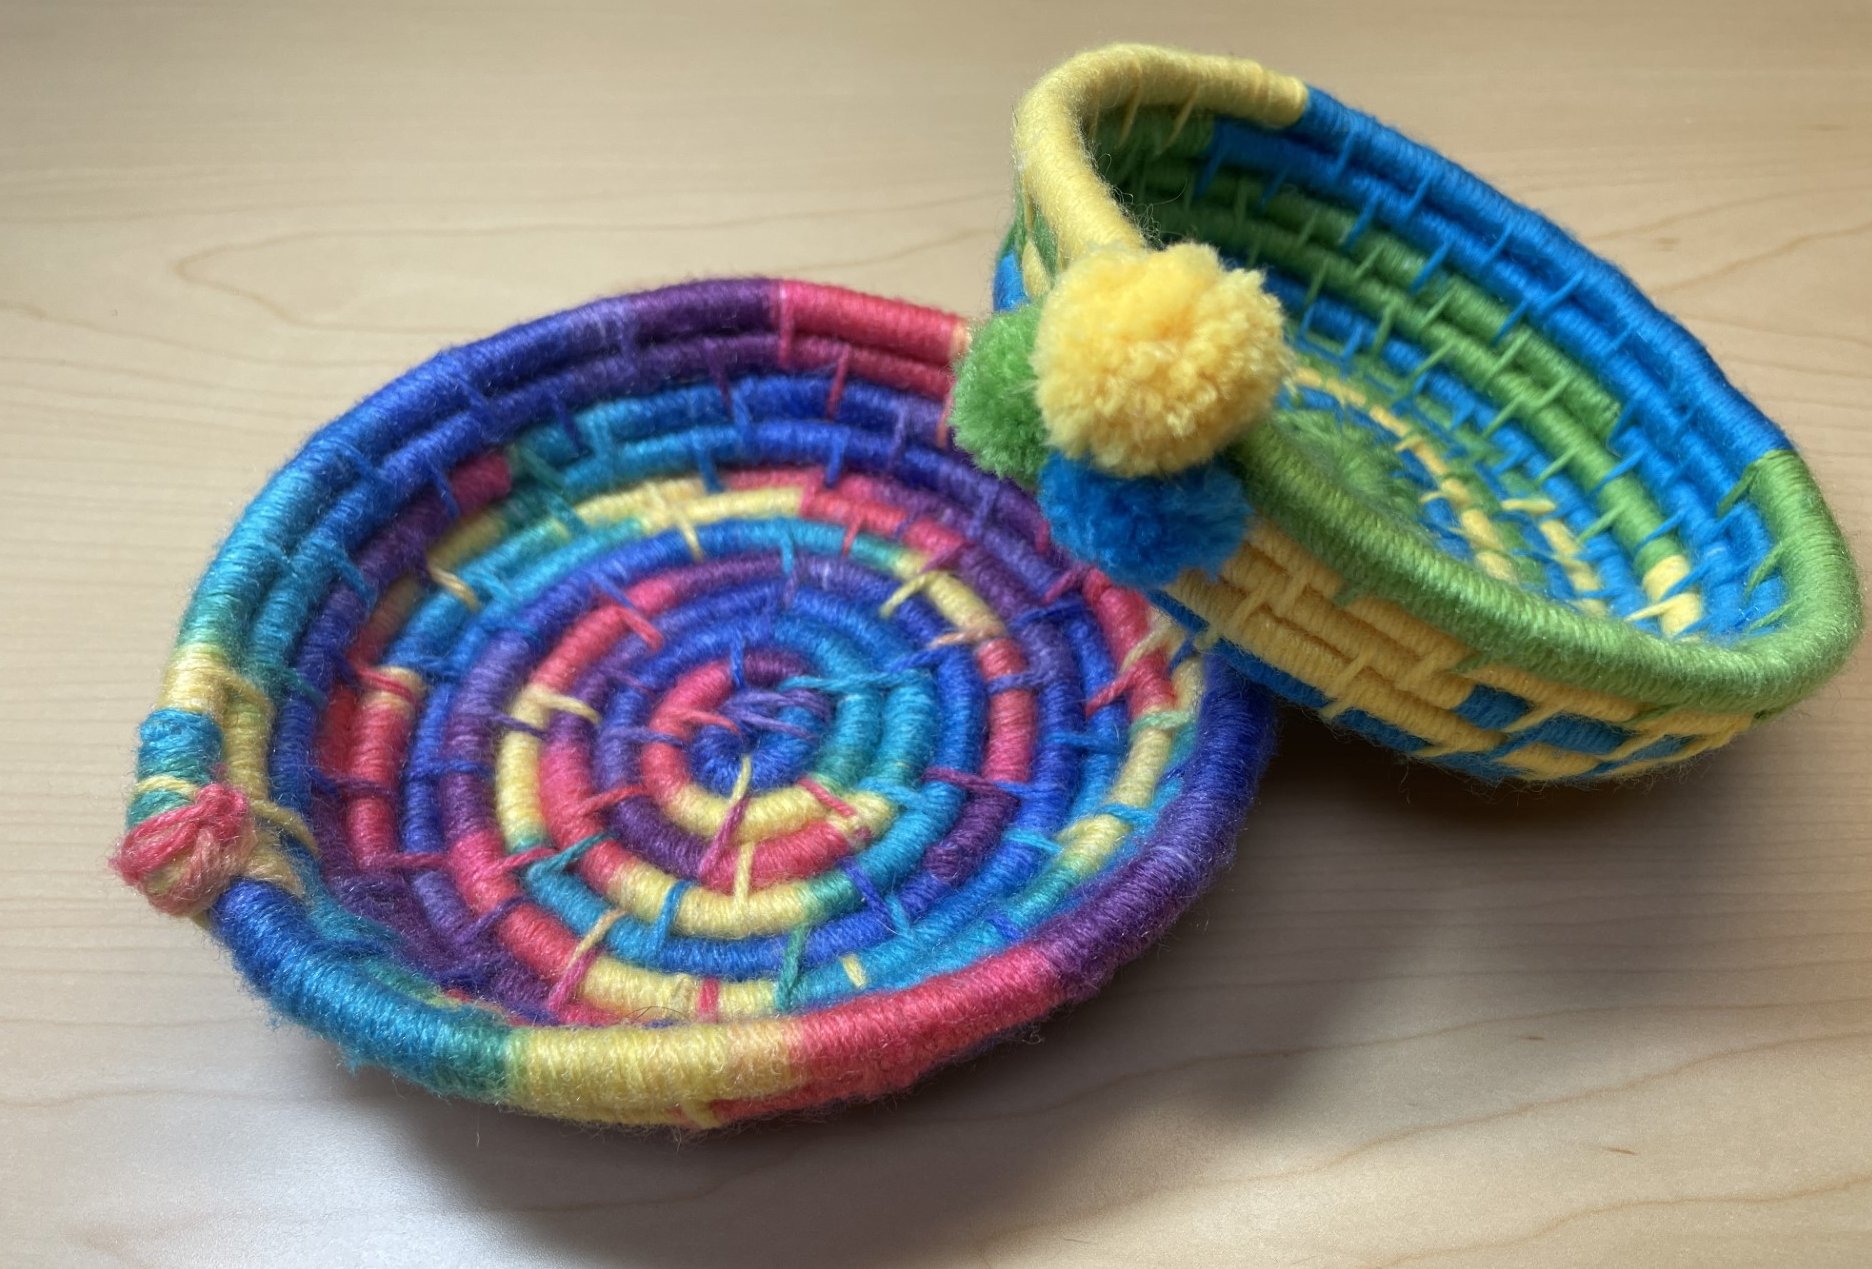 Examples of two woven yarn bowls. One rainbow colored, the other yellow, blue, and green with pom poms.